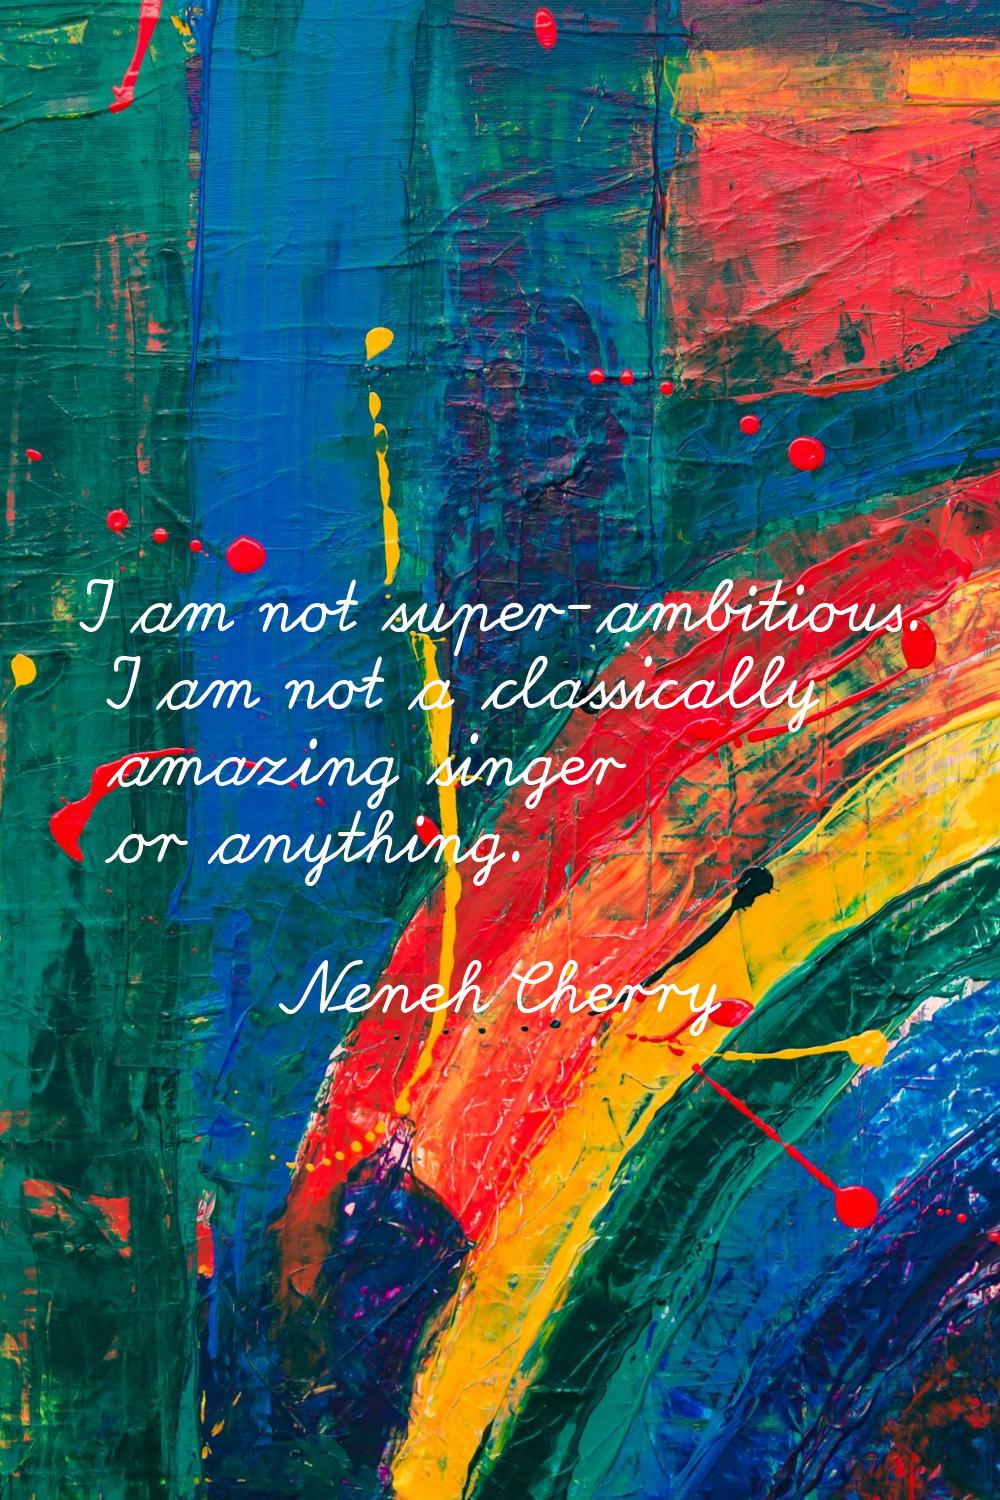 I am not super-ambitious. I am not a classically amazing singer or anything.